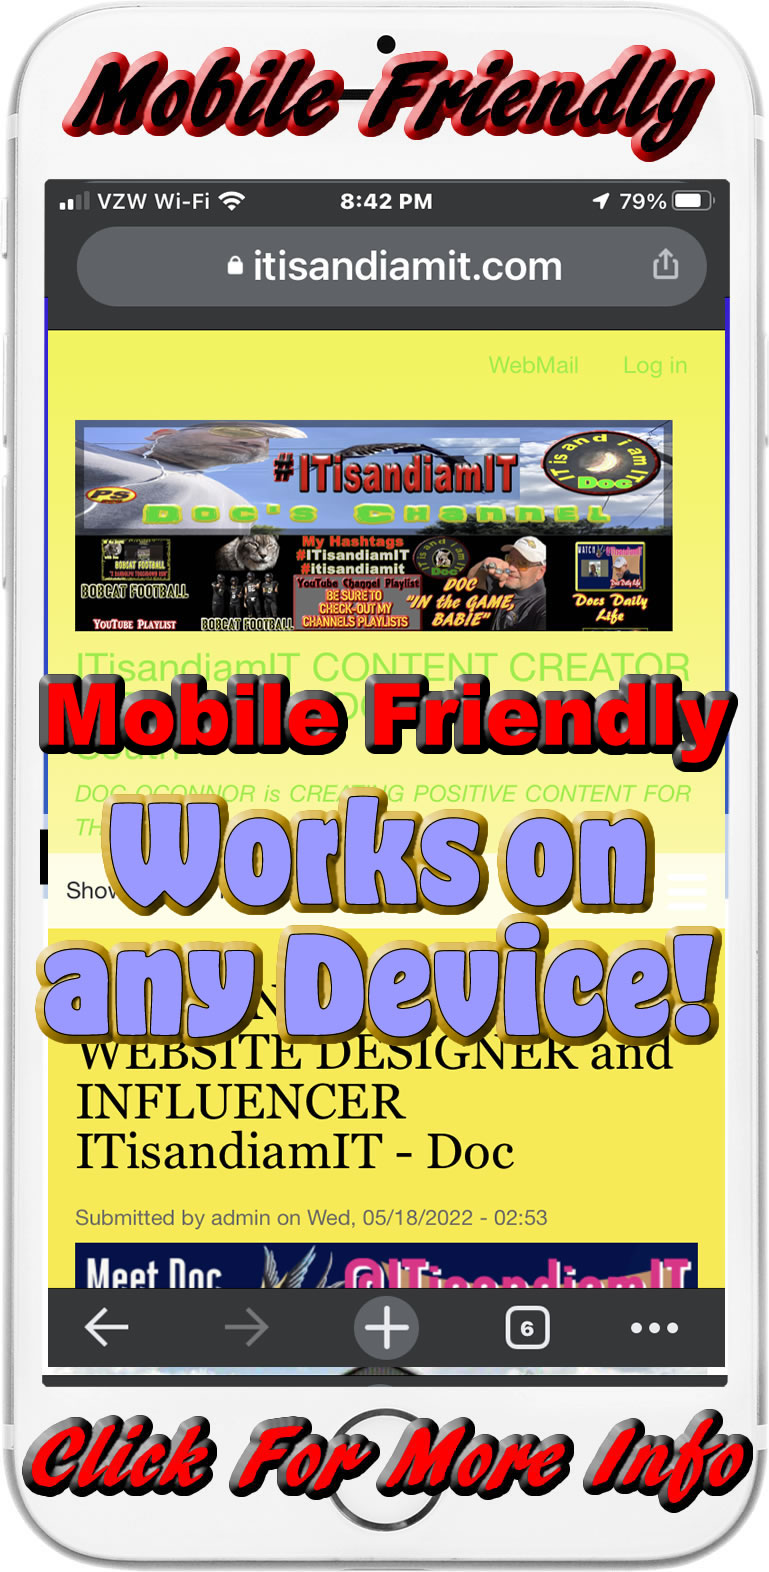 ITisandiamIT.com is a Mobile Friendly Website easily viewed on all devices